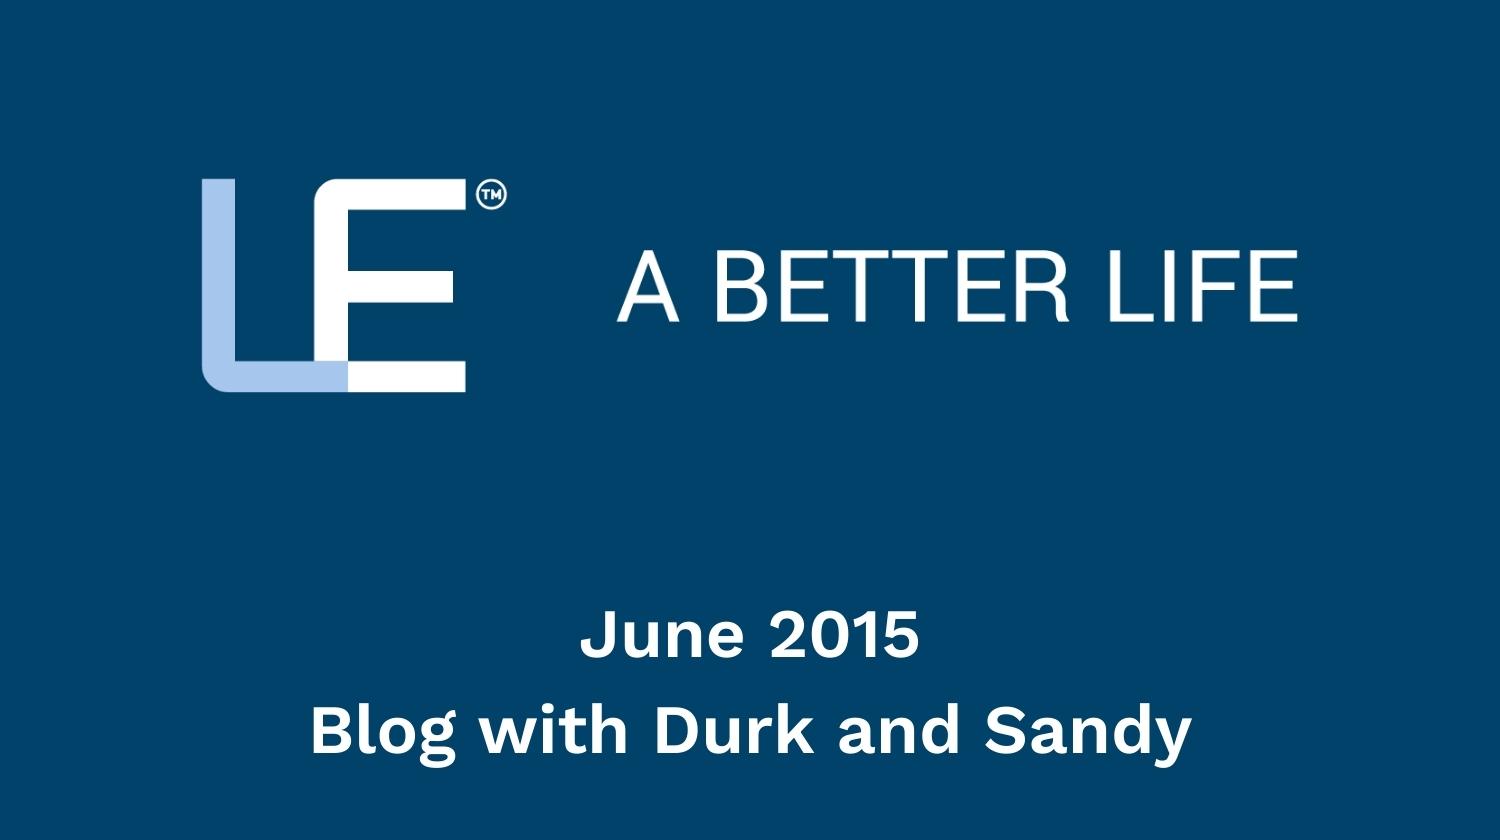 June 2015 Blog with Durk and Sandy